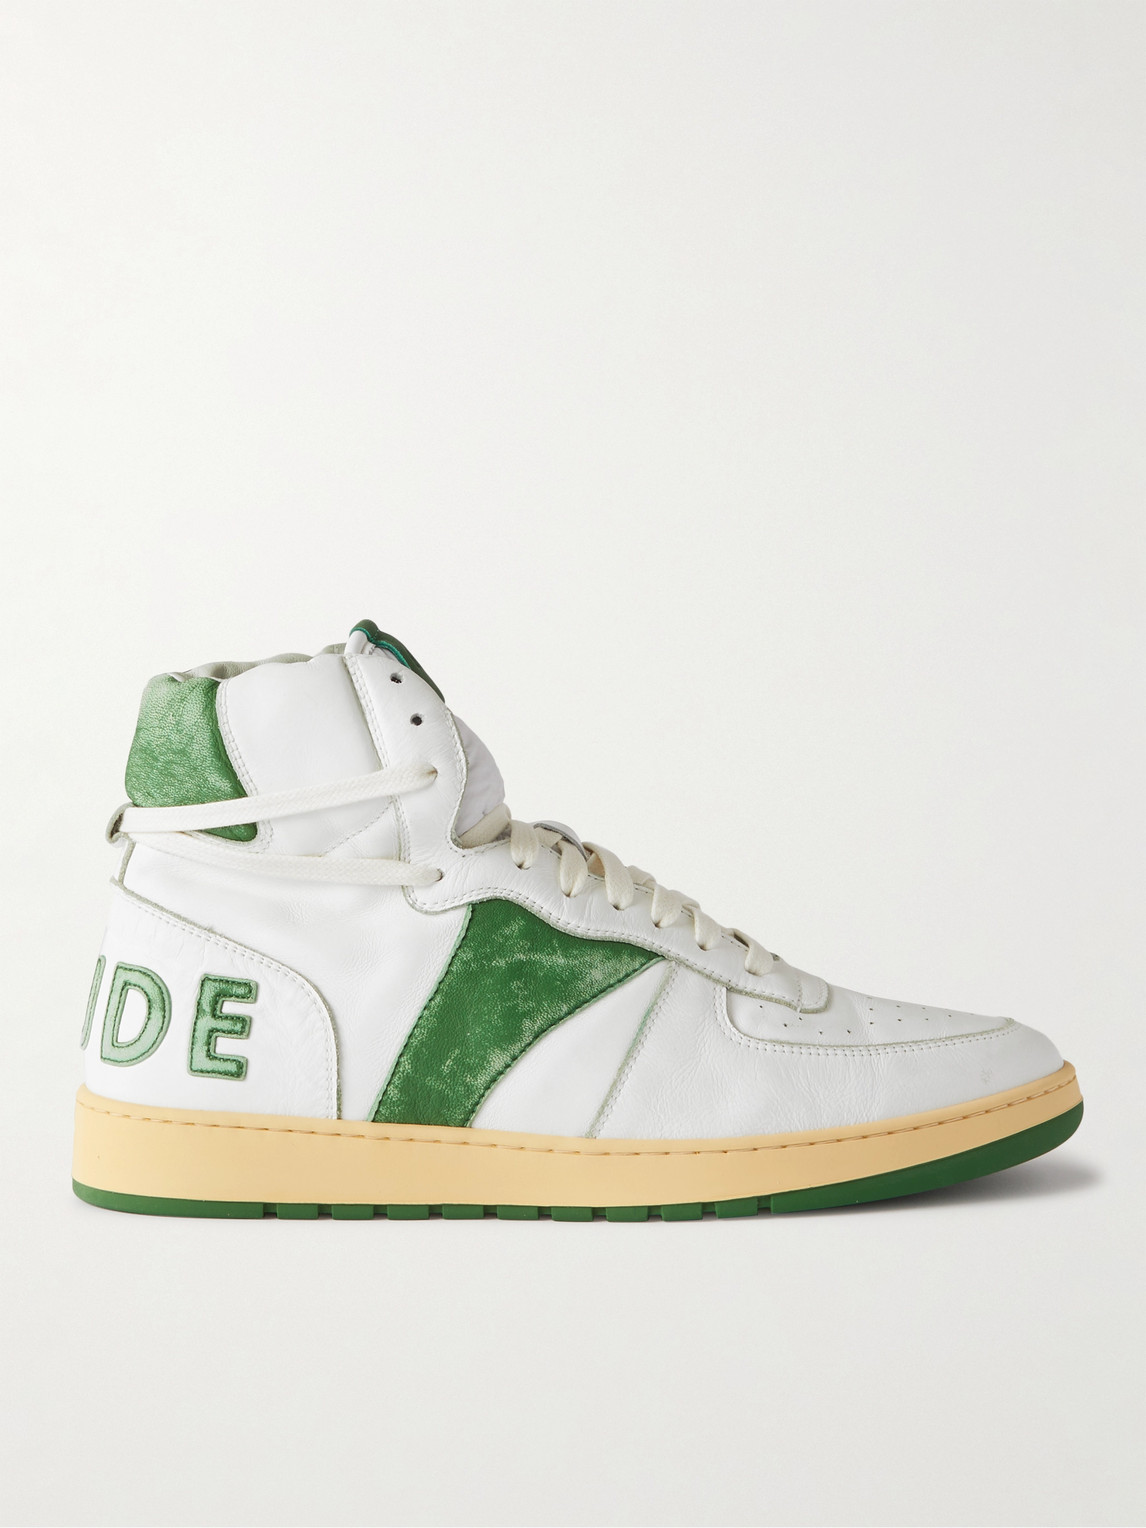 RHUDE RHECESS SKY SUEDE-TRIMMED LEATHER HIGH-TOP SNEAKERS